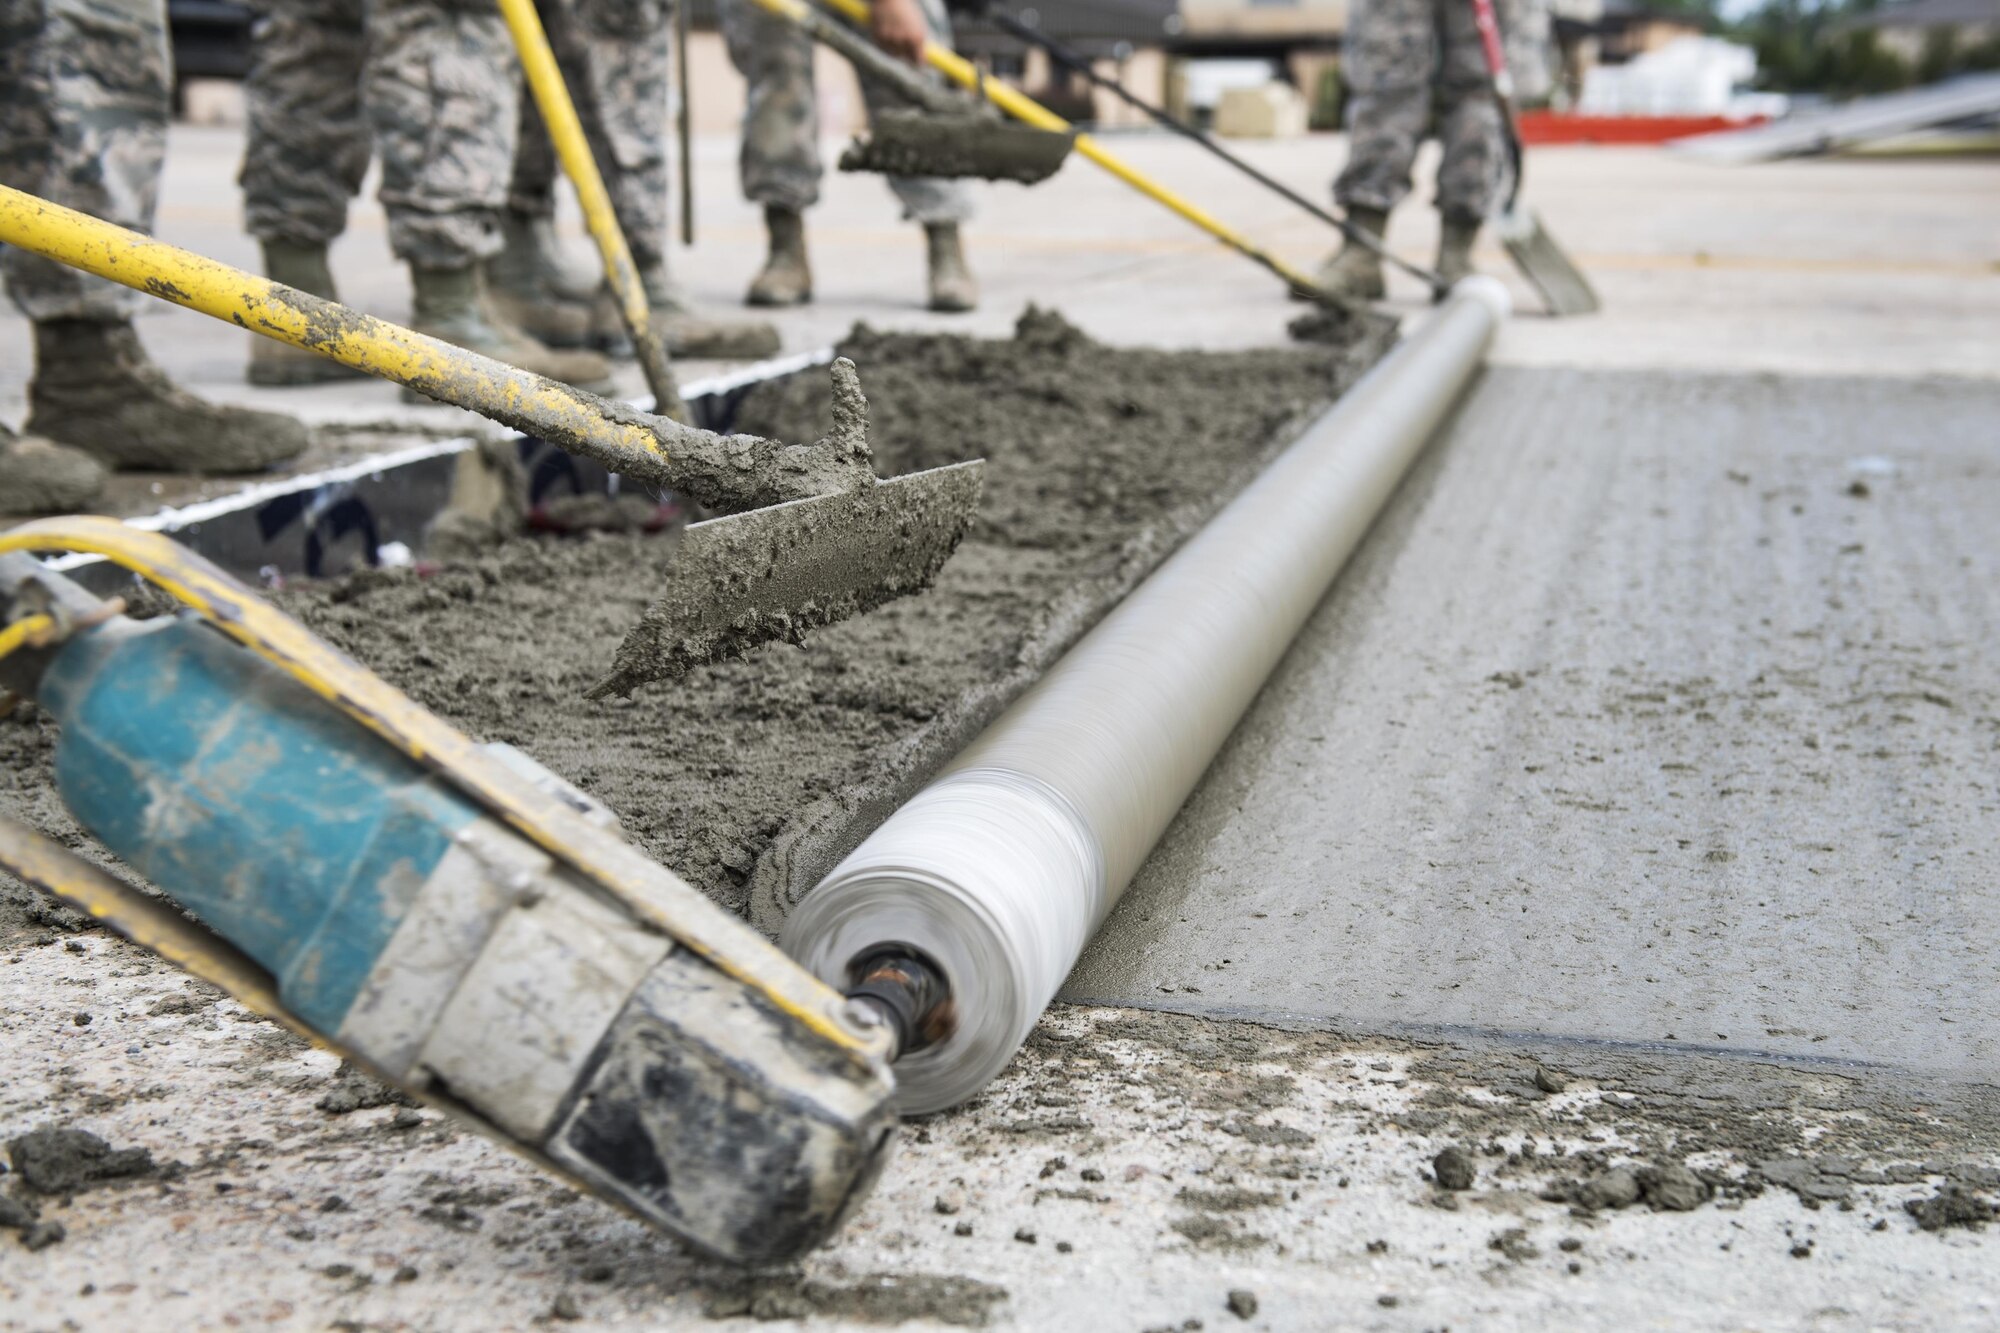 Students use various concrete leveling tools to finish a new patch of cement during a Pavements Maintenance, Inspection and Repair course, June 15, 2017, at Moody Air Force Base, Ga. Every year, training managers at the major command level across the Air Force pick multiple bases across the Air Force to host the course, and this year Moody hosted one from June 5-16. (U.S. Air Force photo by Senior Airman Janiqua P. Robinson)